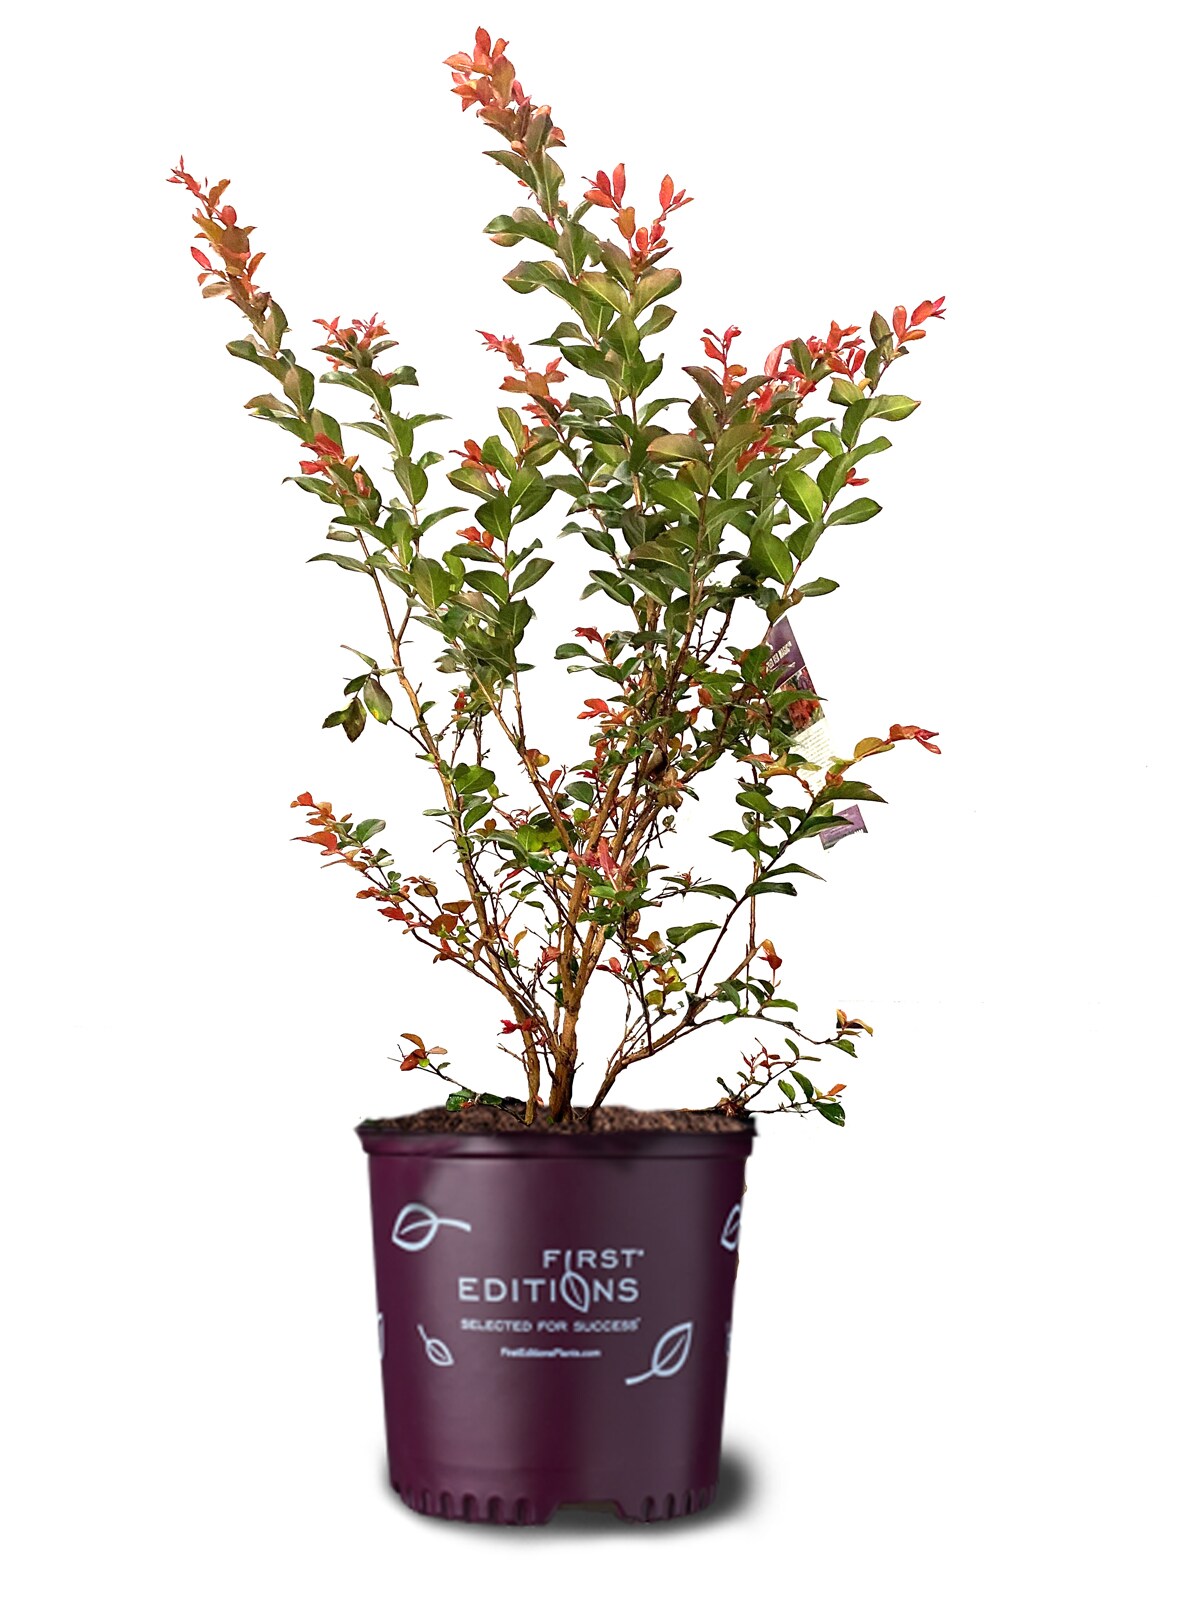 Lowe's 3.58-Gallon Pomegranate Tree (L7402) - Upright Deciduous Tree with  Showy Red Flowers - Full Sun - Medium Growth Rate in the Fruit Plants  department at